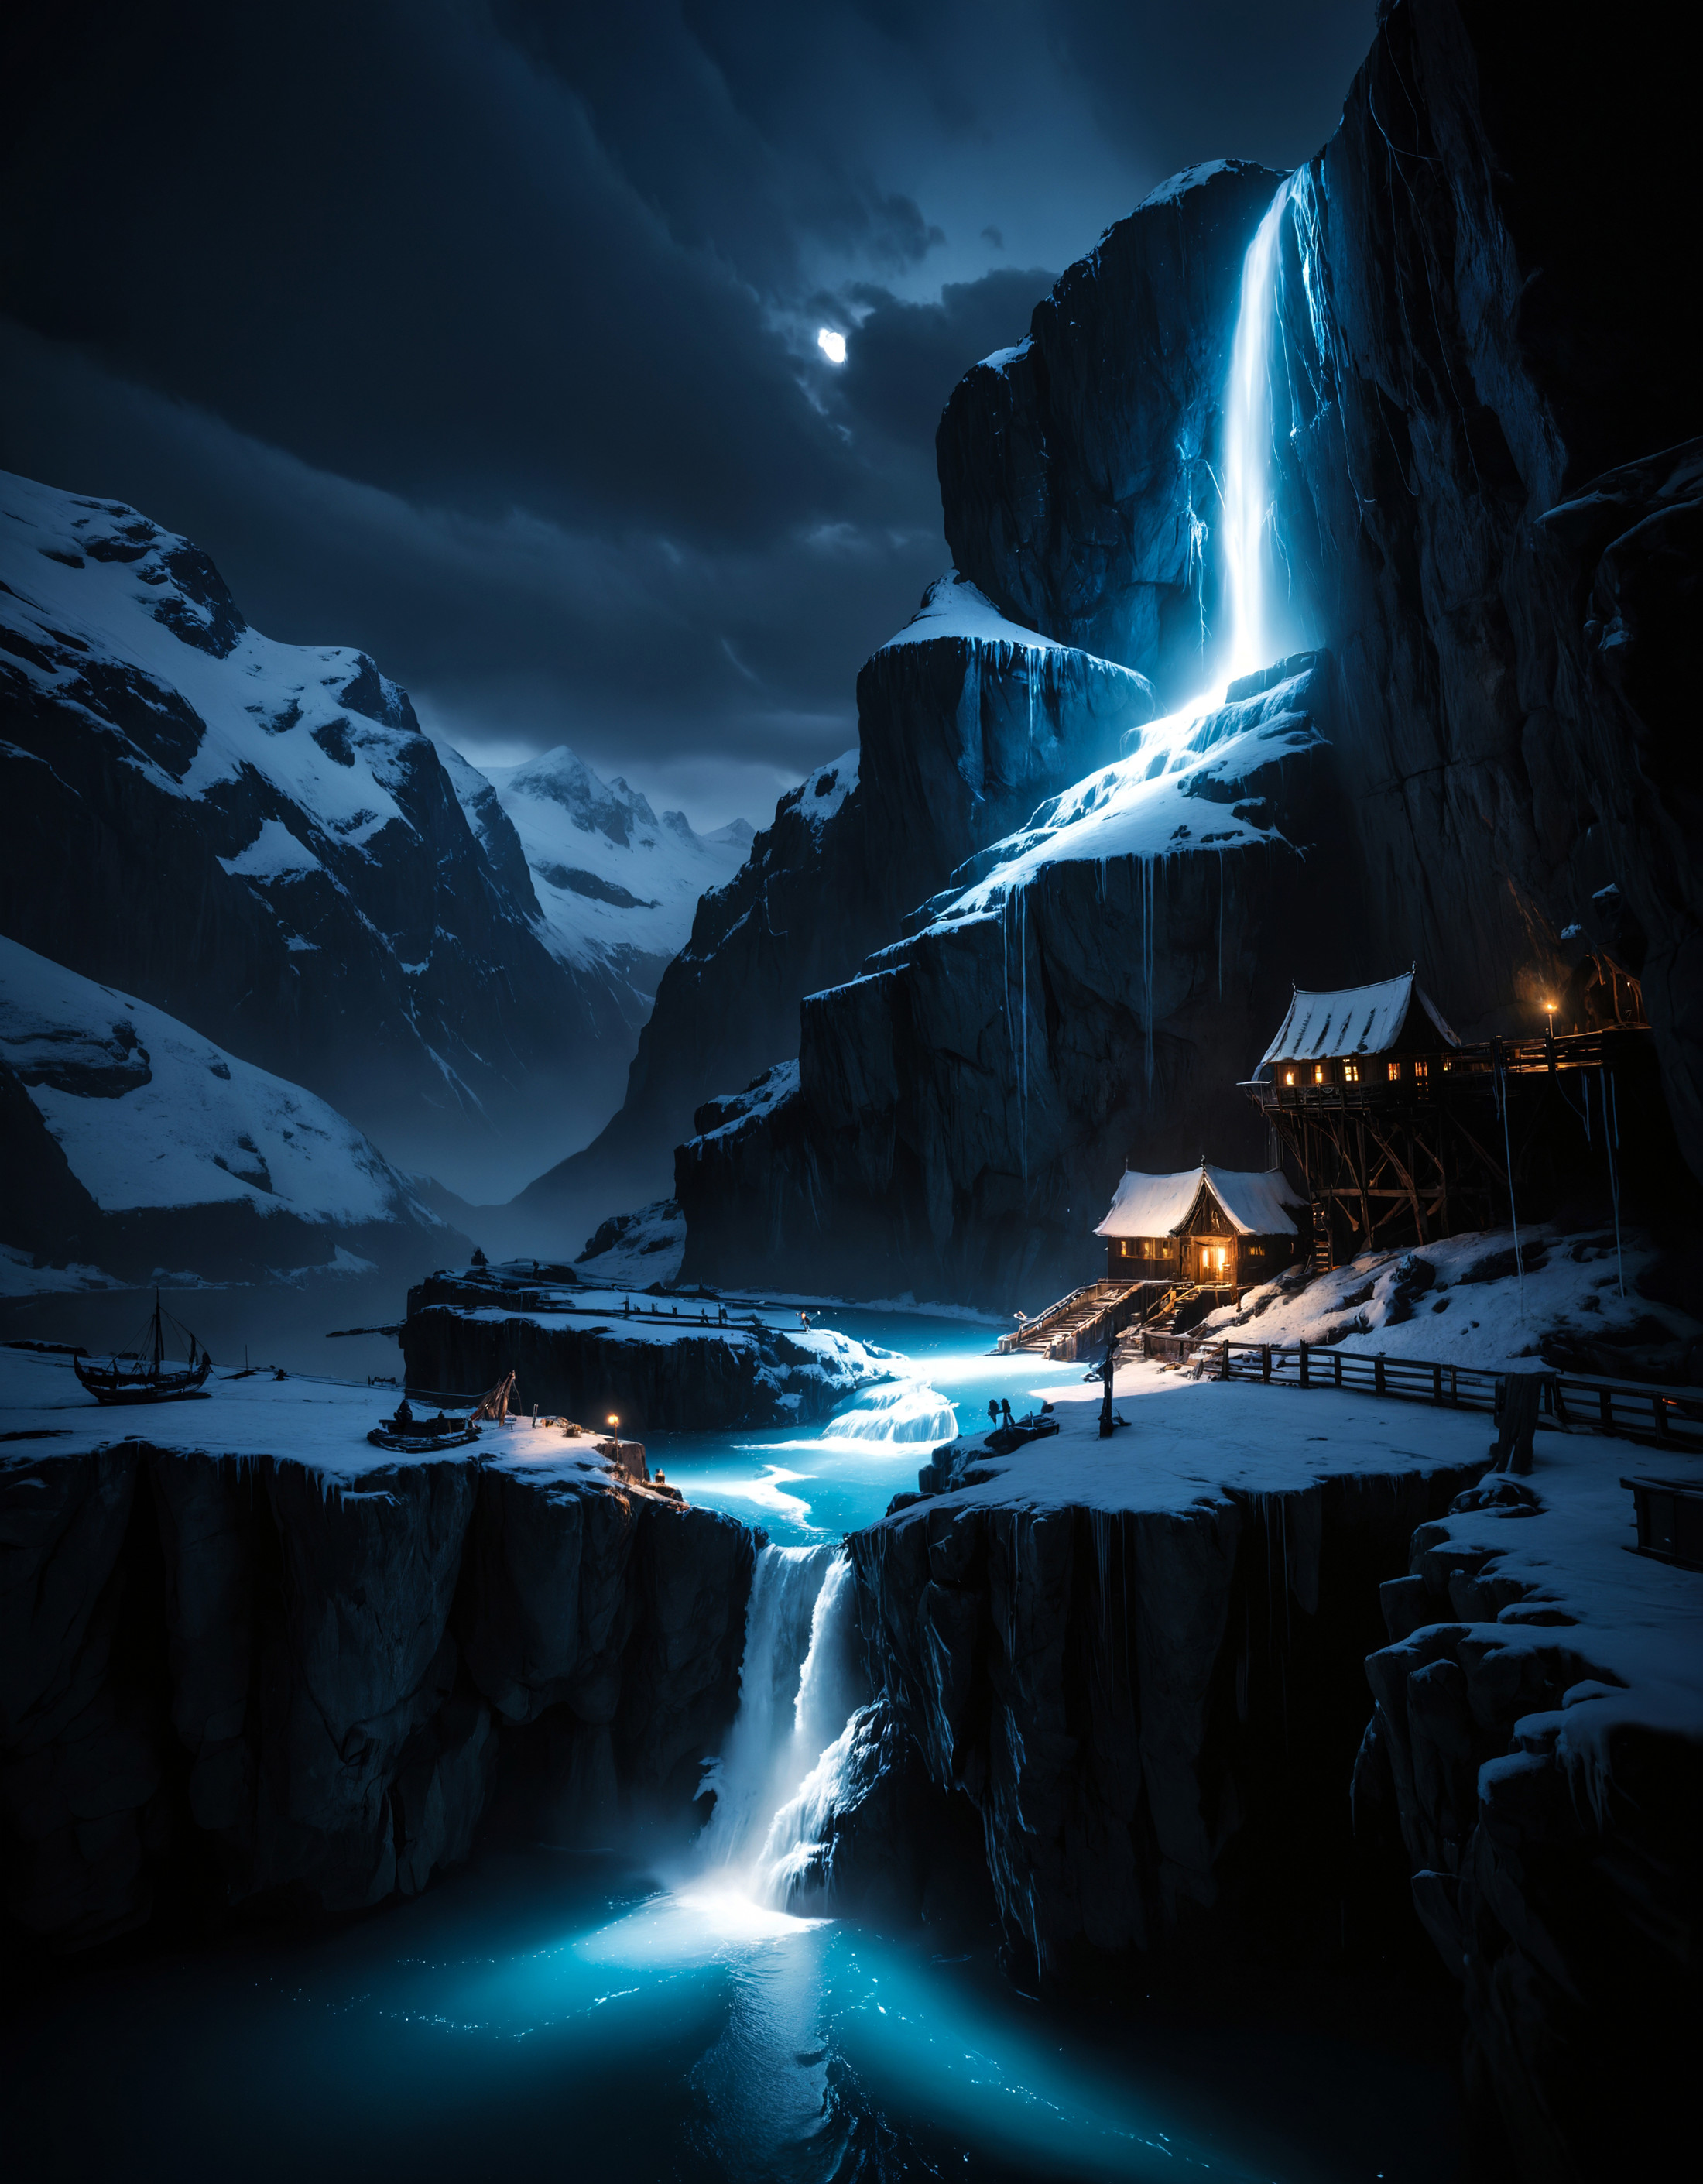 (zavy-mthcl:1.3), A night shot from the deck of a pirate ship amidst a glacial fjord. Towering ice cliffs rise dramaticall...